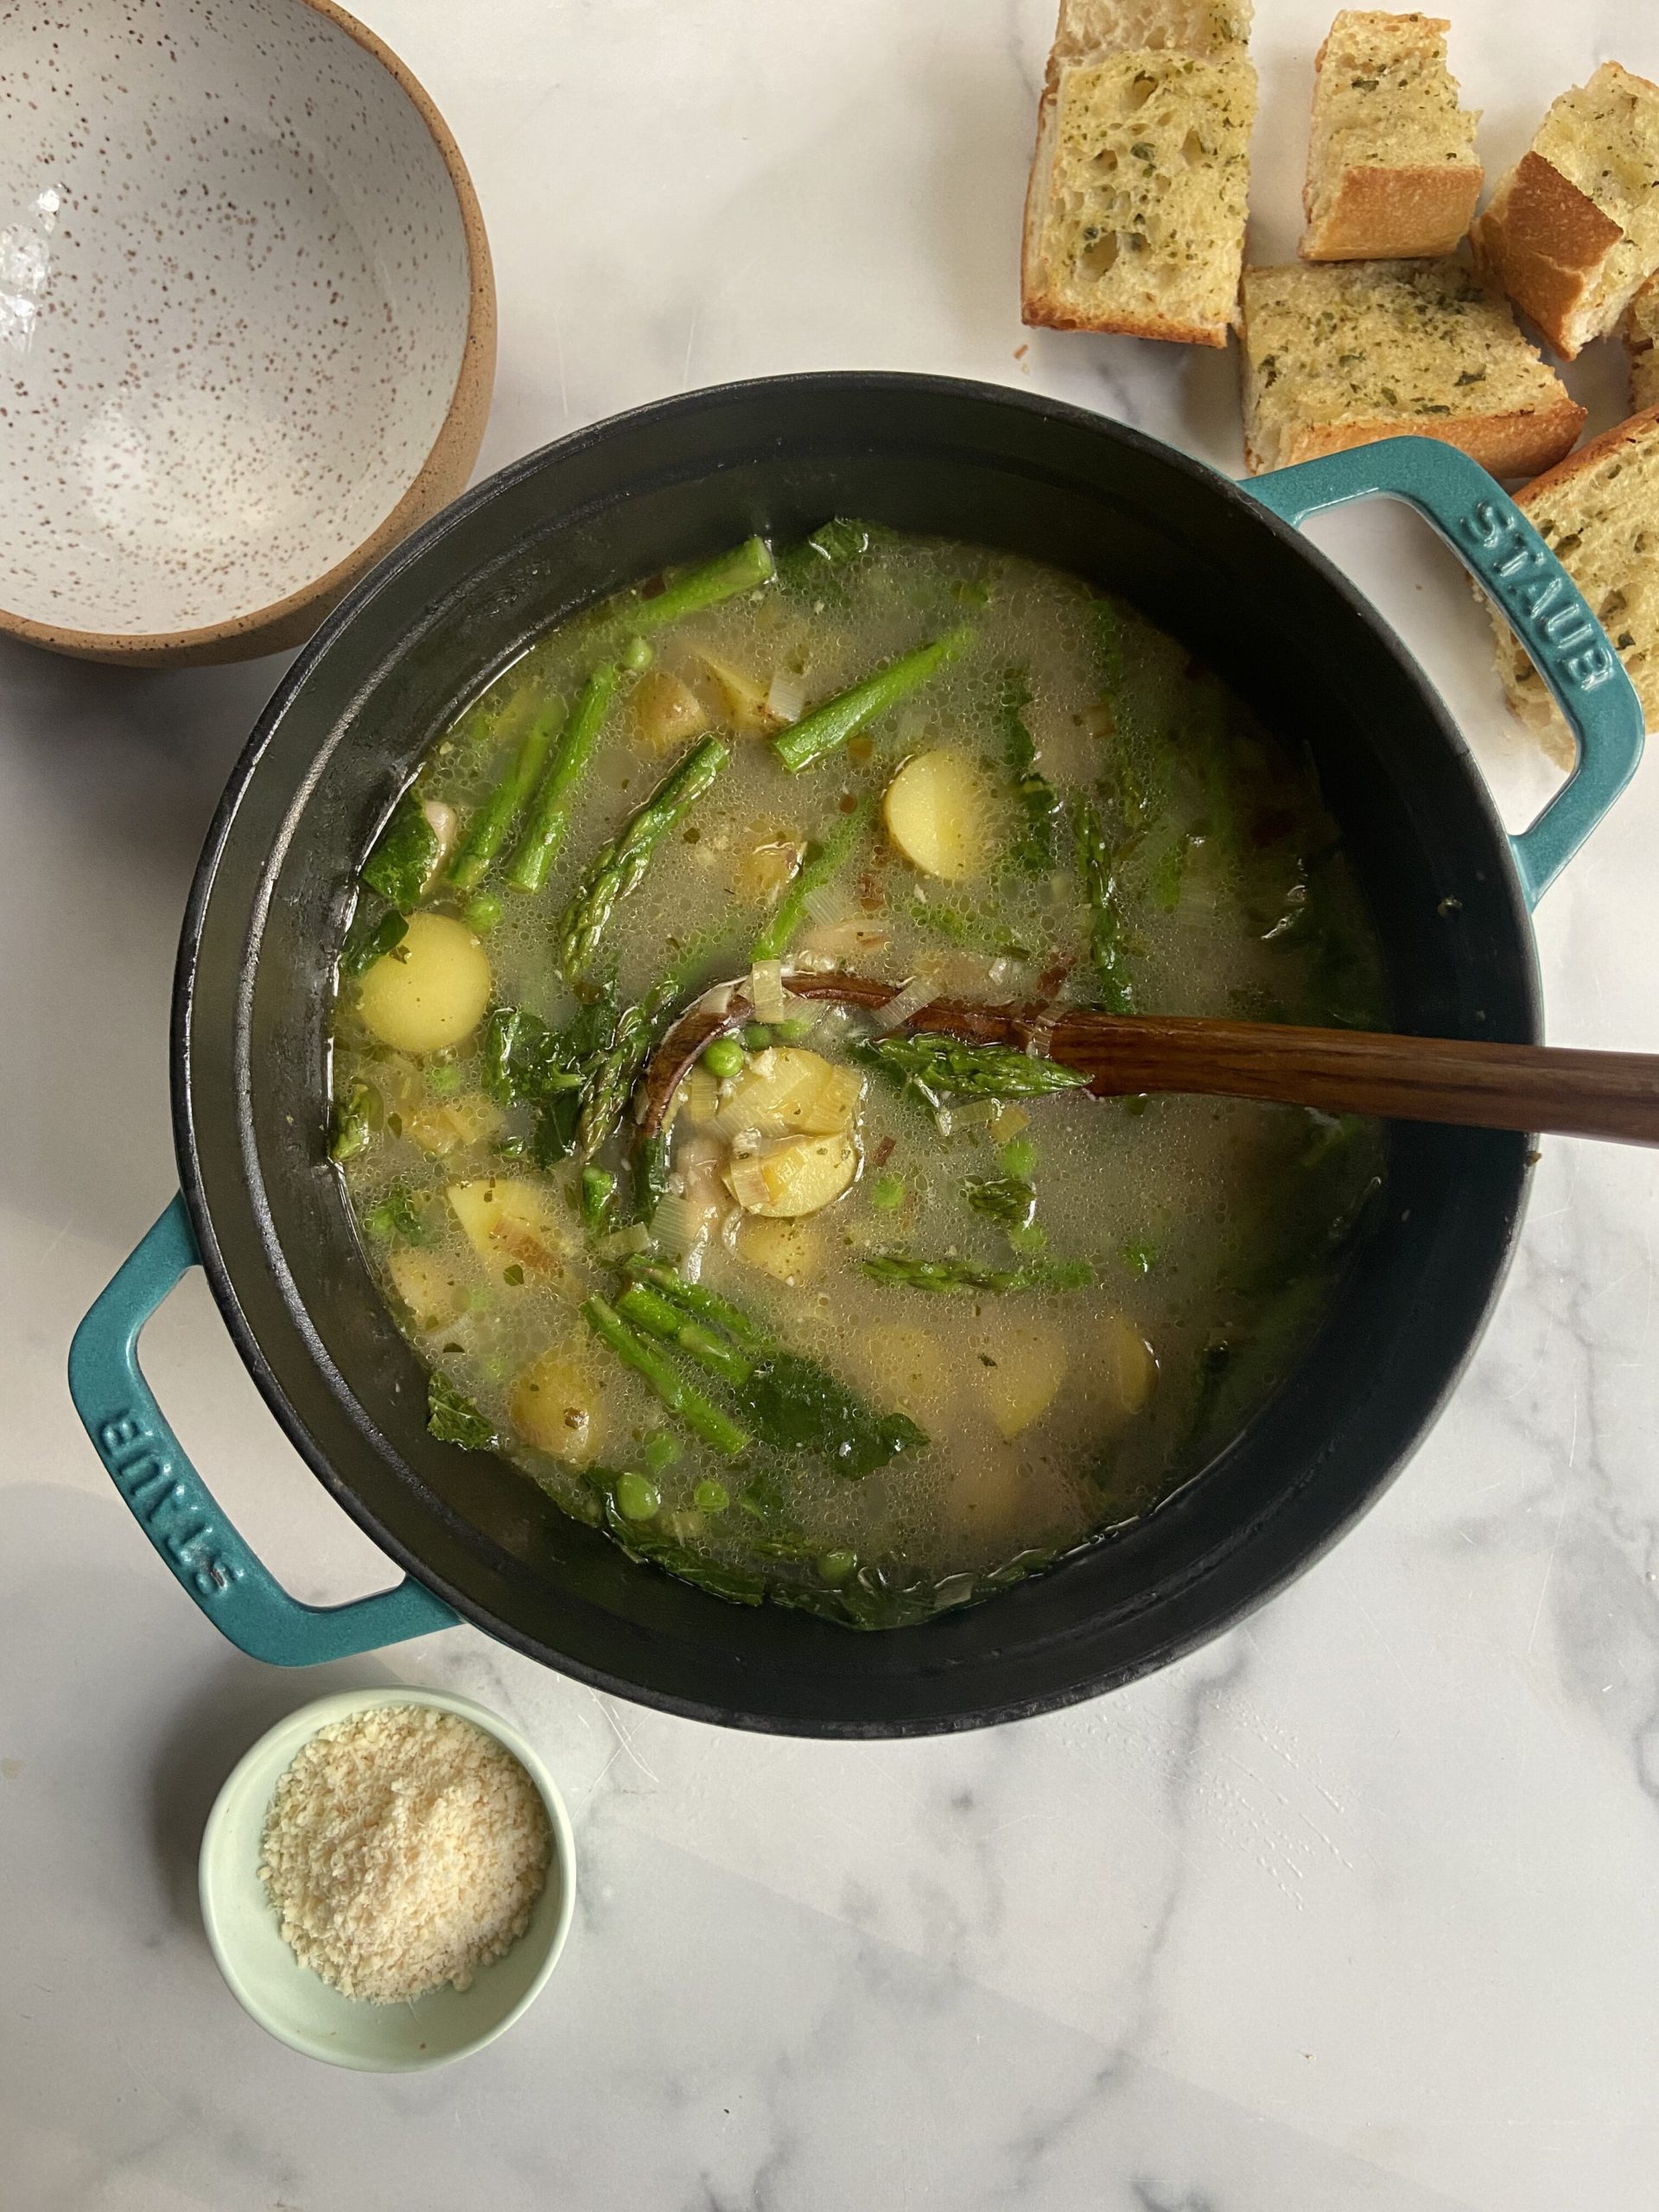 Green Minestrone Soup recipe: The perfect recipe for all those spring veggies | Didn't I Just Feed You podcast